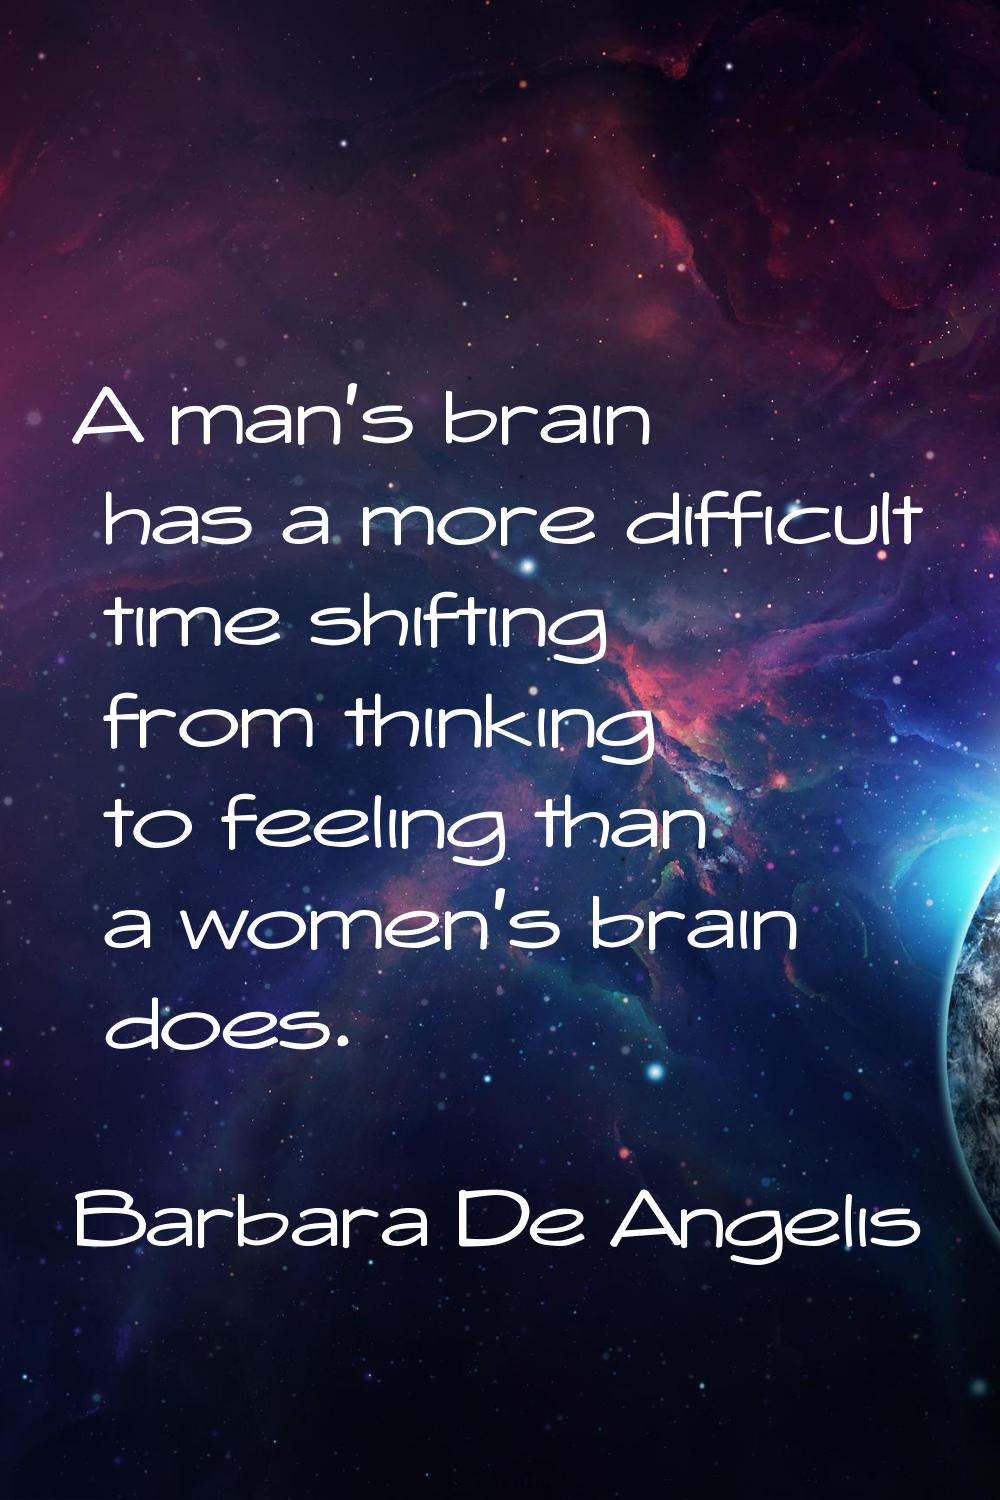 A man's brain has a more difficult time shifting from thinking to feeling than a women's brain does